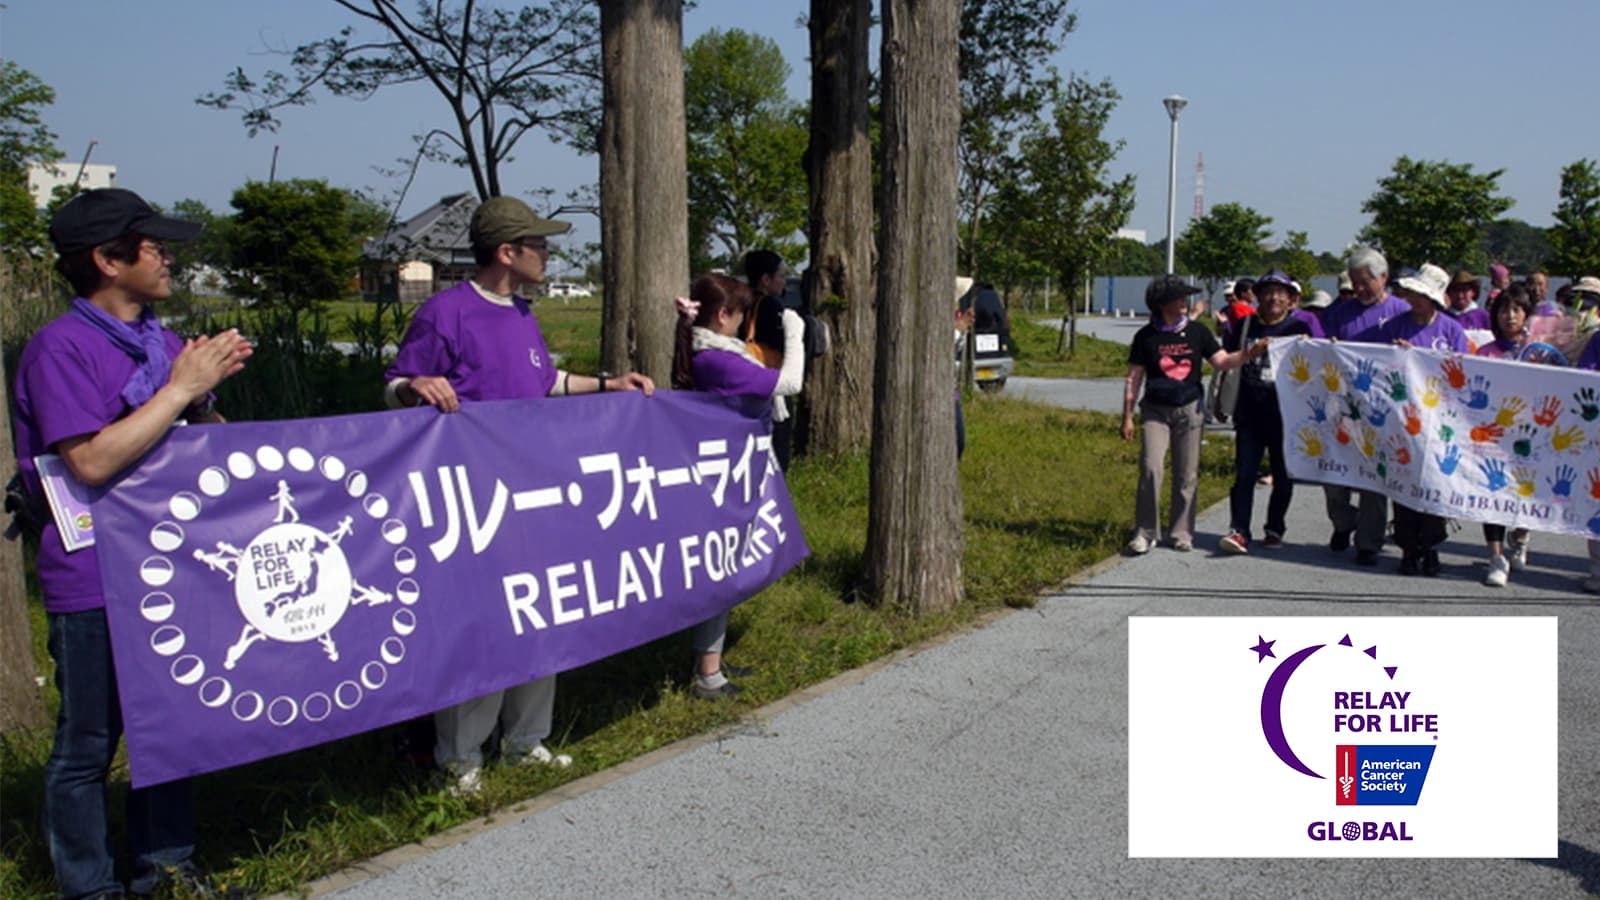 Two groups of people with relay for life banners